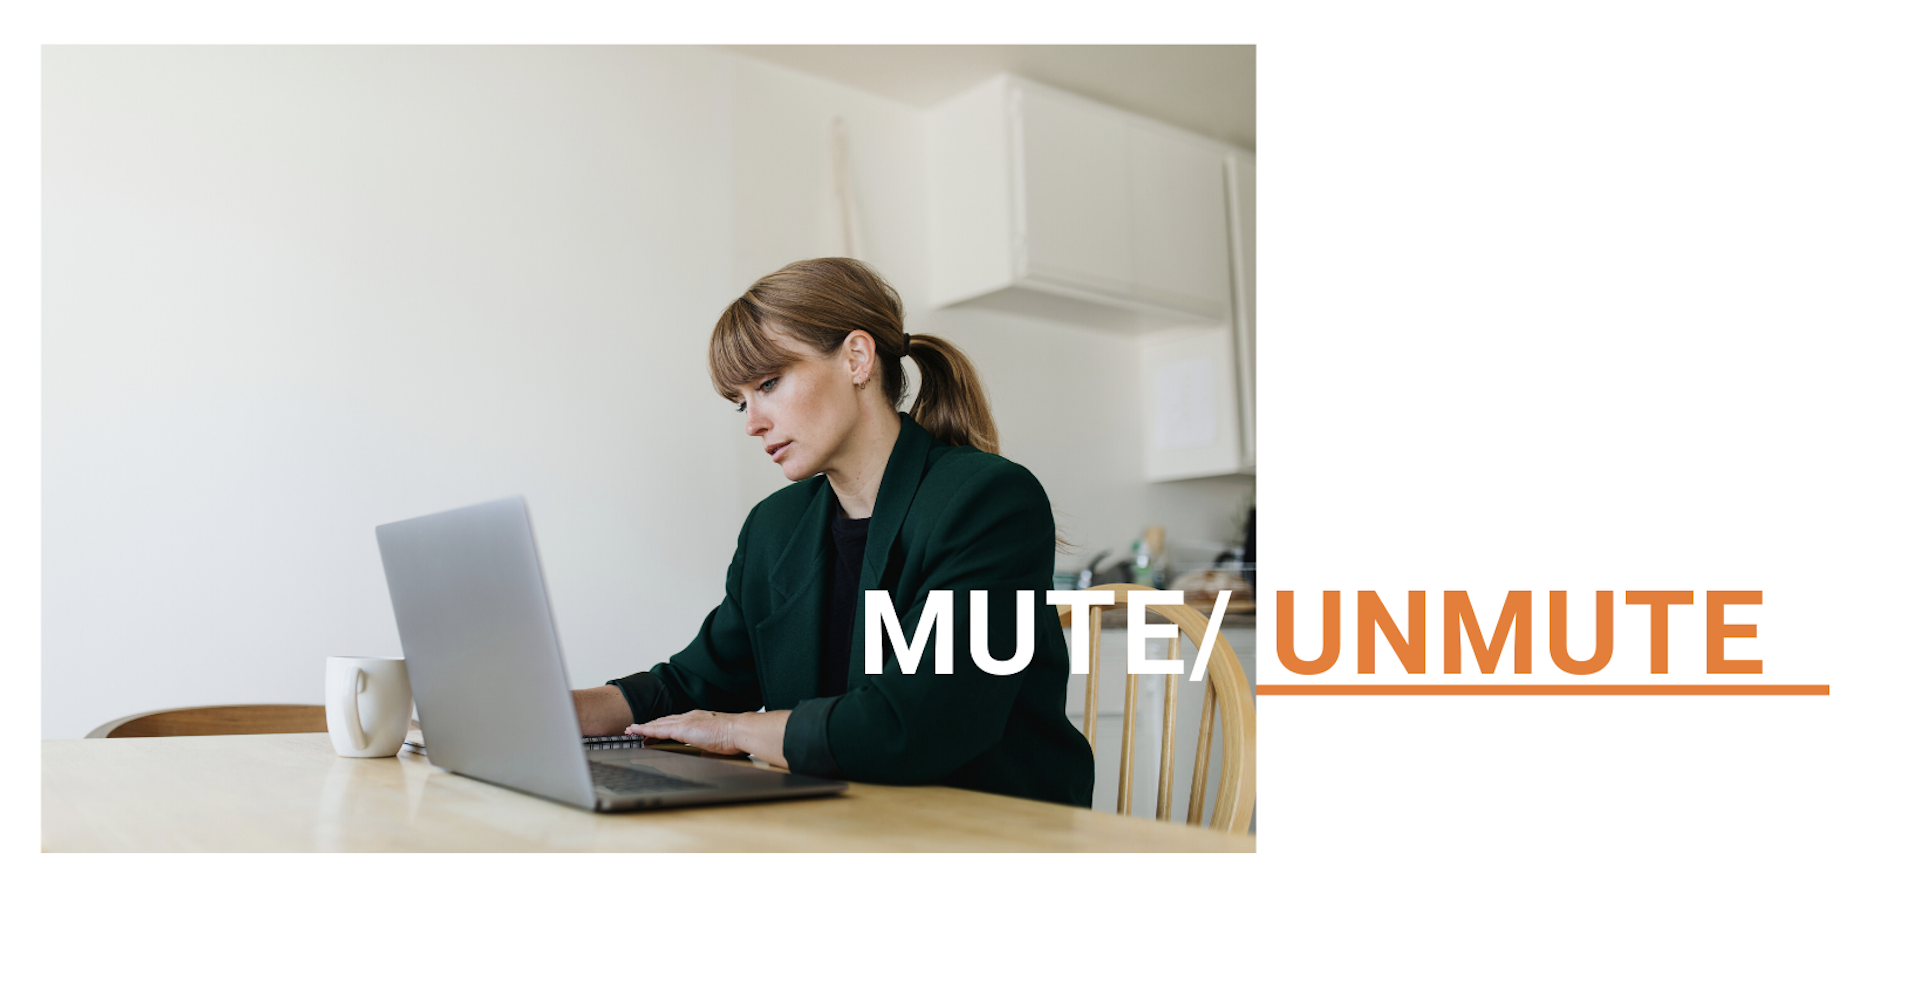 Muteunmute yourself in a videoconferencing call